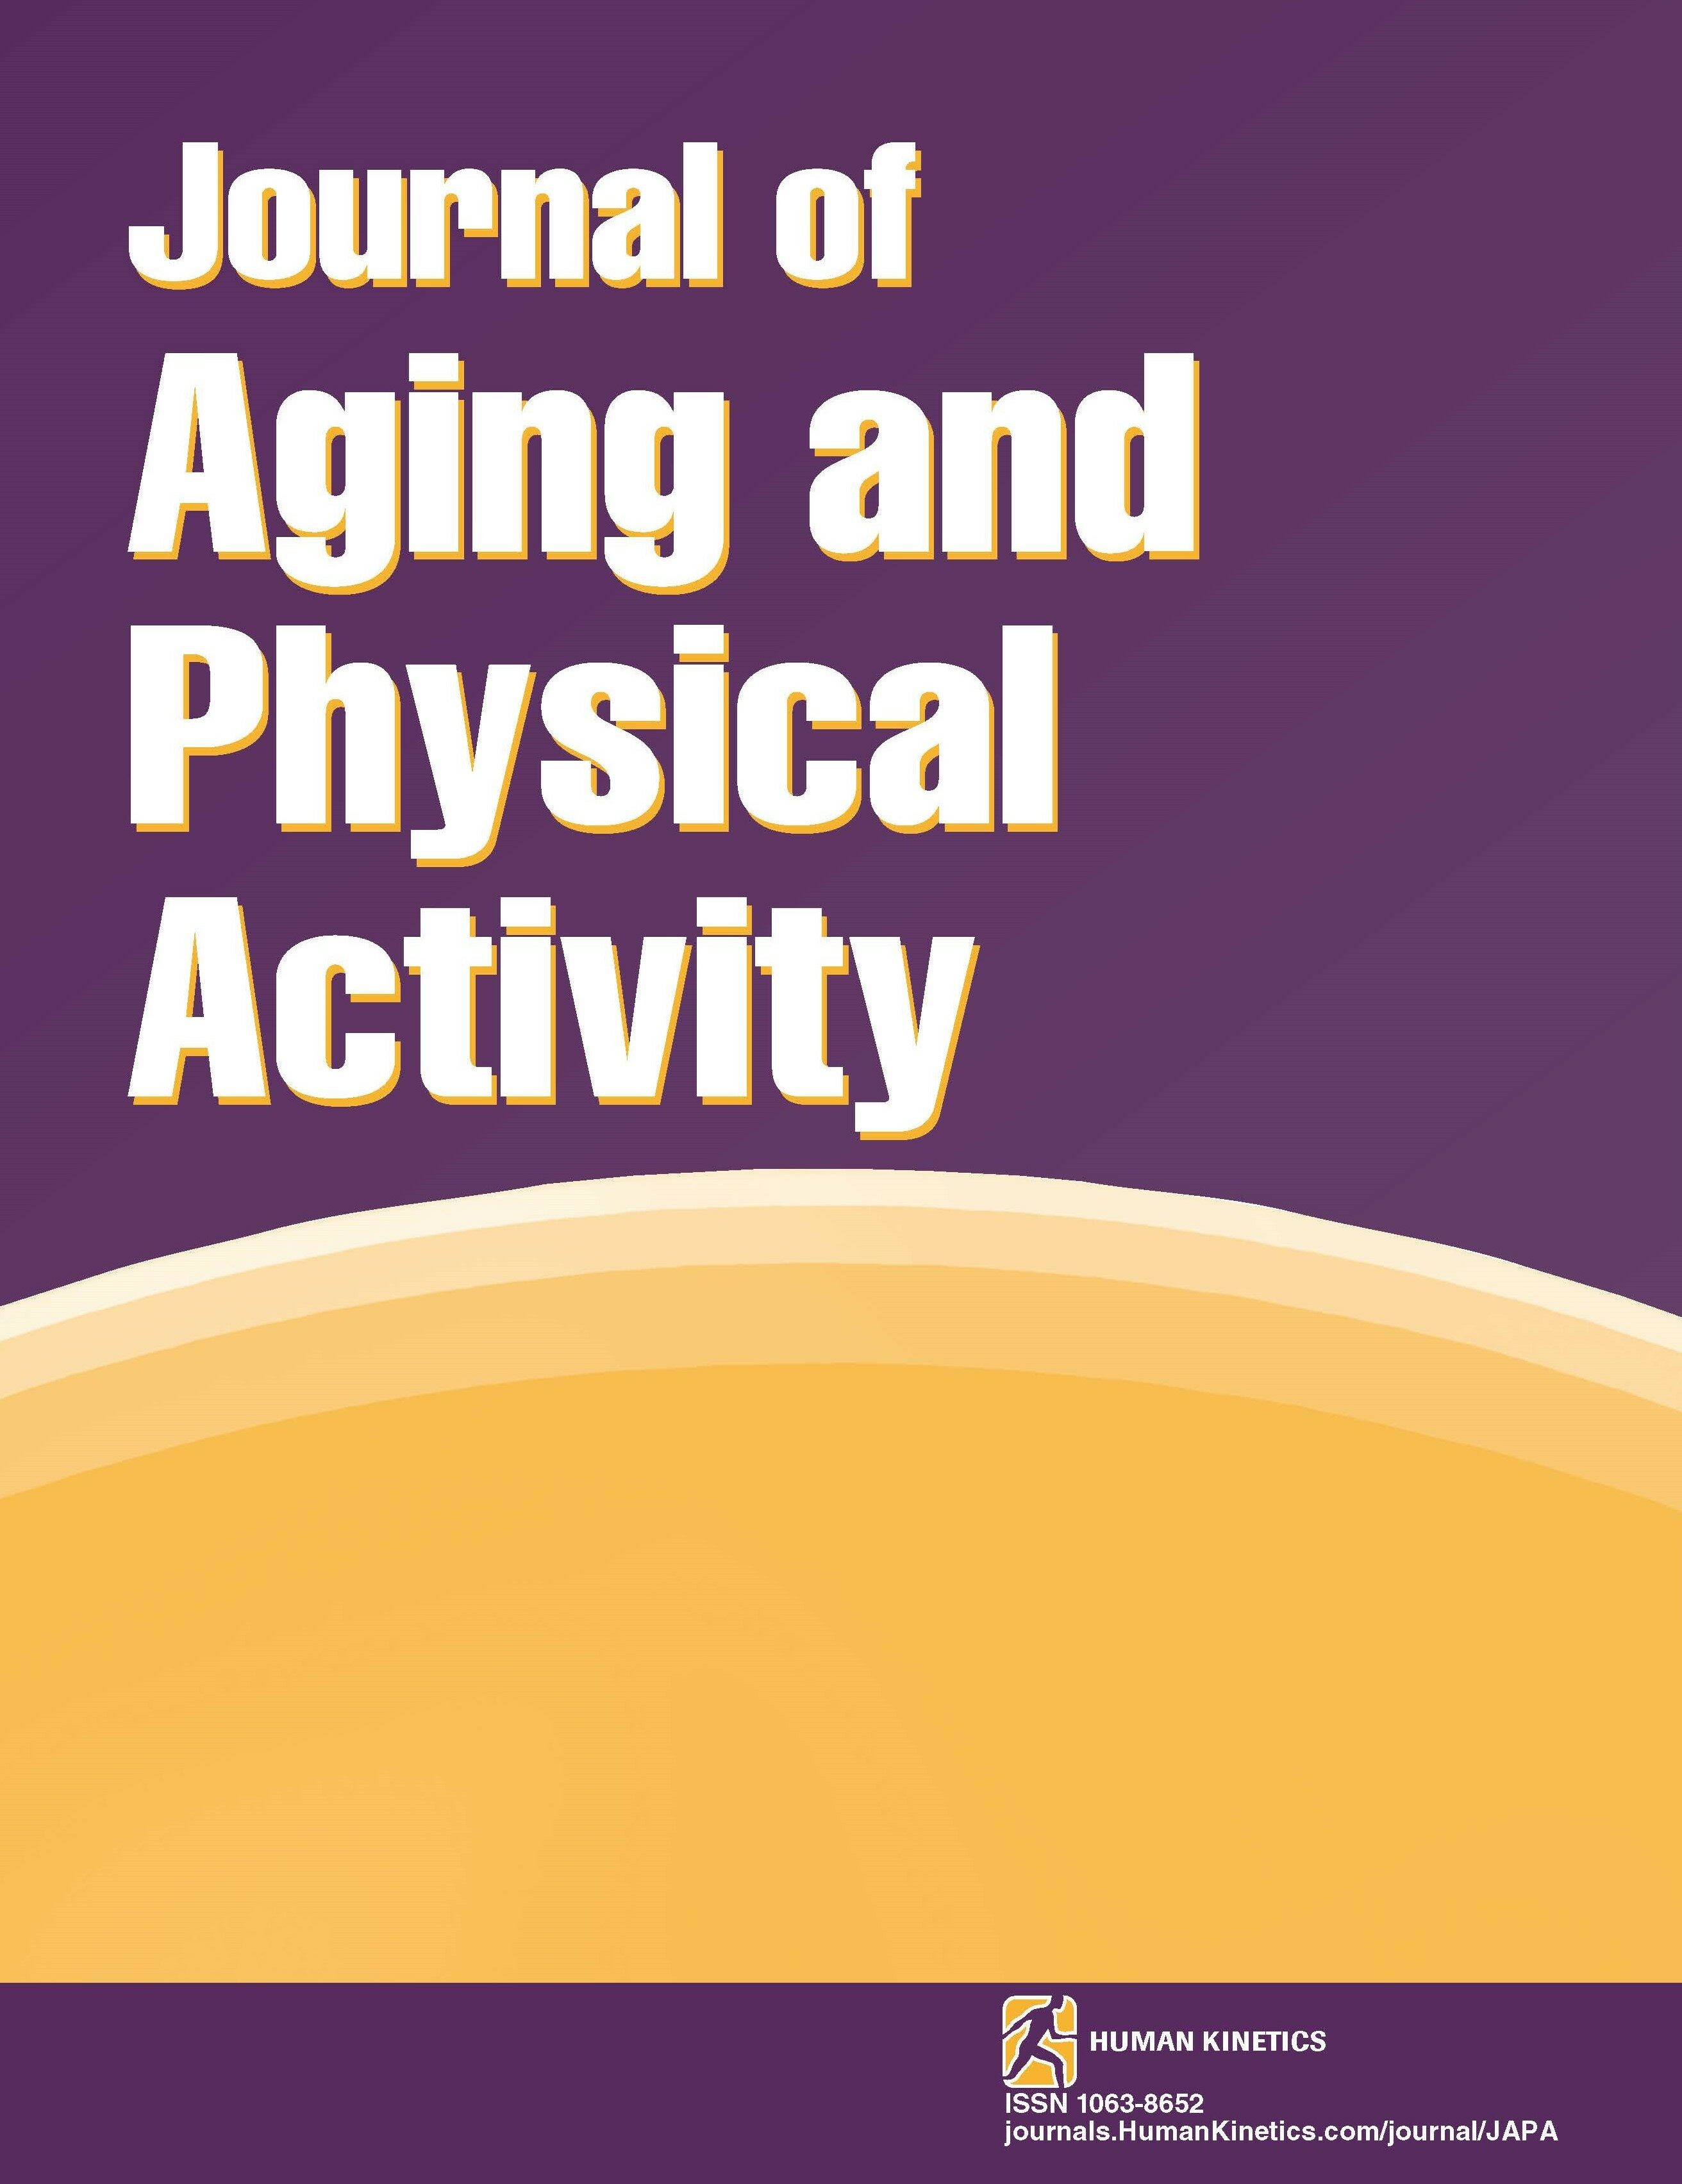 Effects of Dancing Associated With Resistance Training on Functional Parameters and Quality of Life of Aging Women: A Randomized Controlled Trial